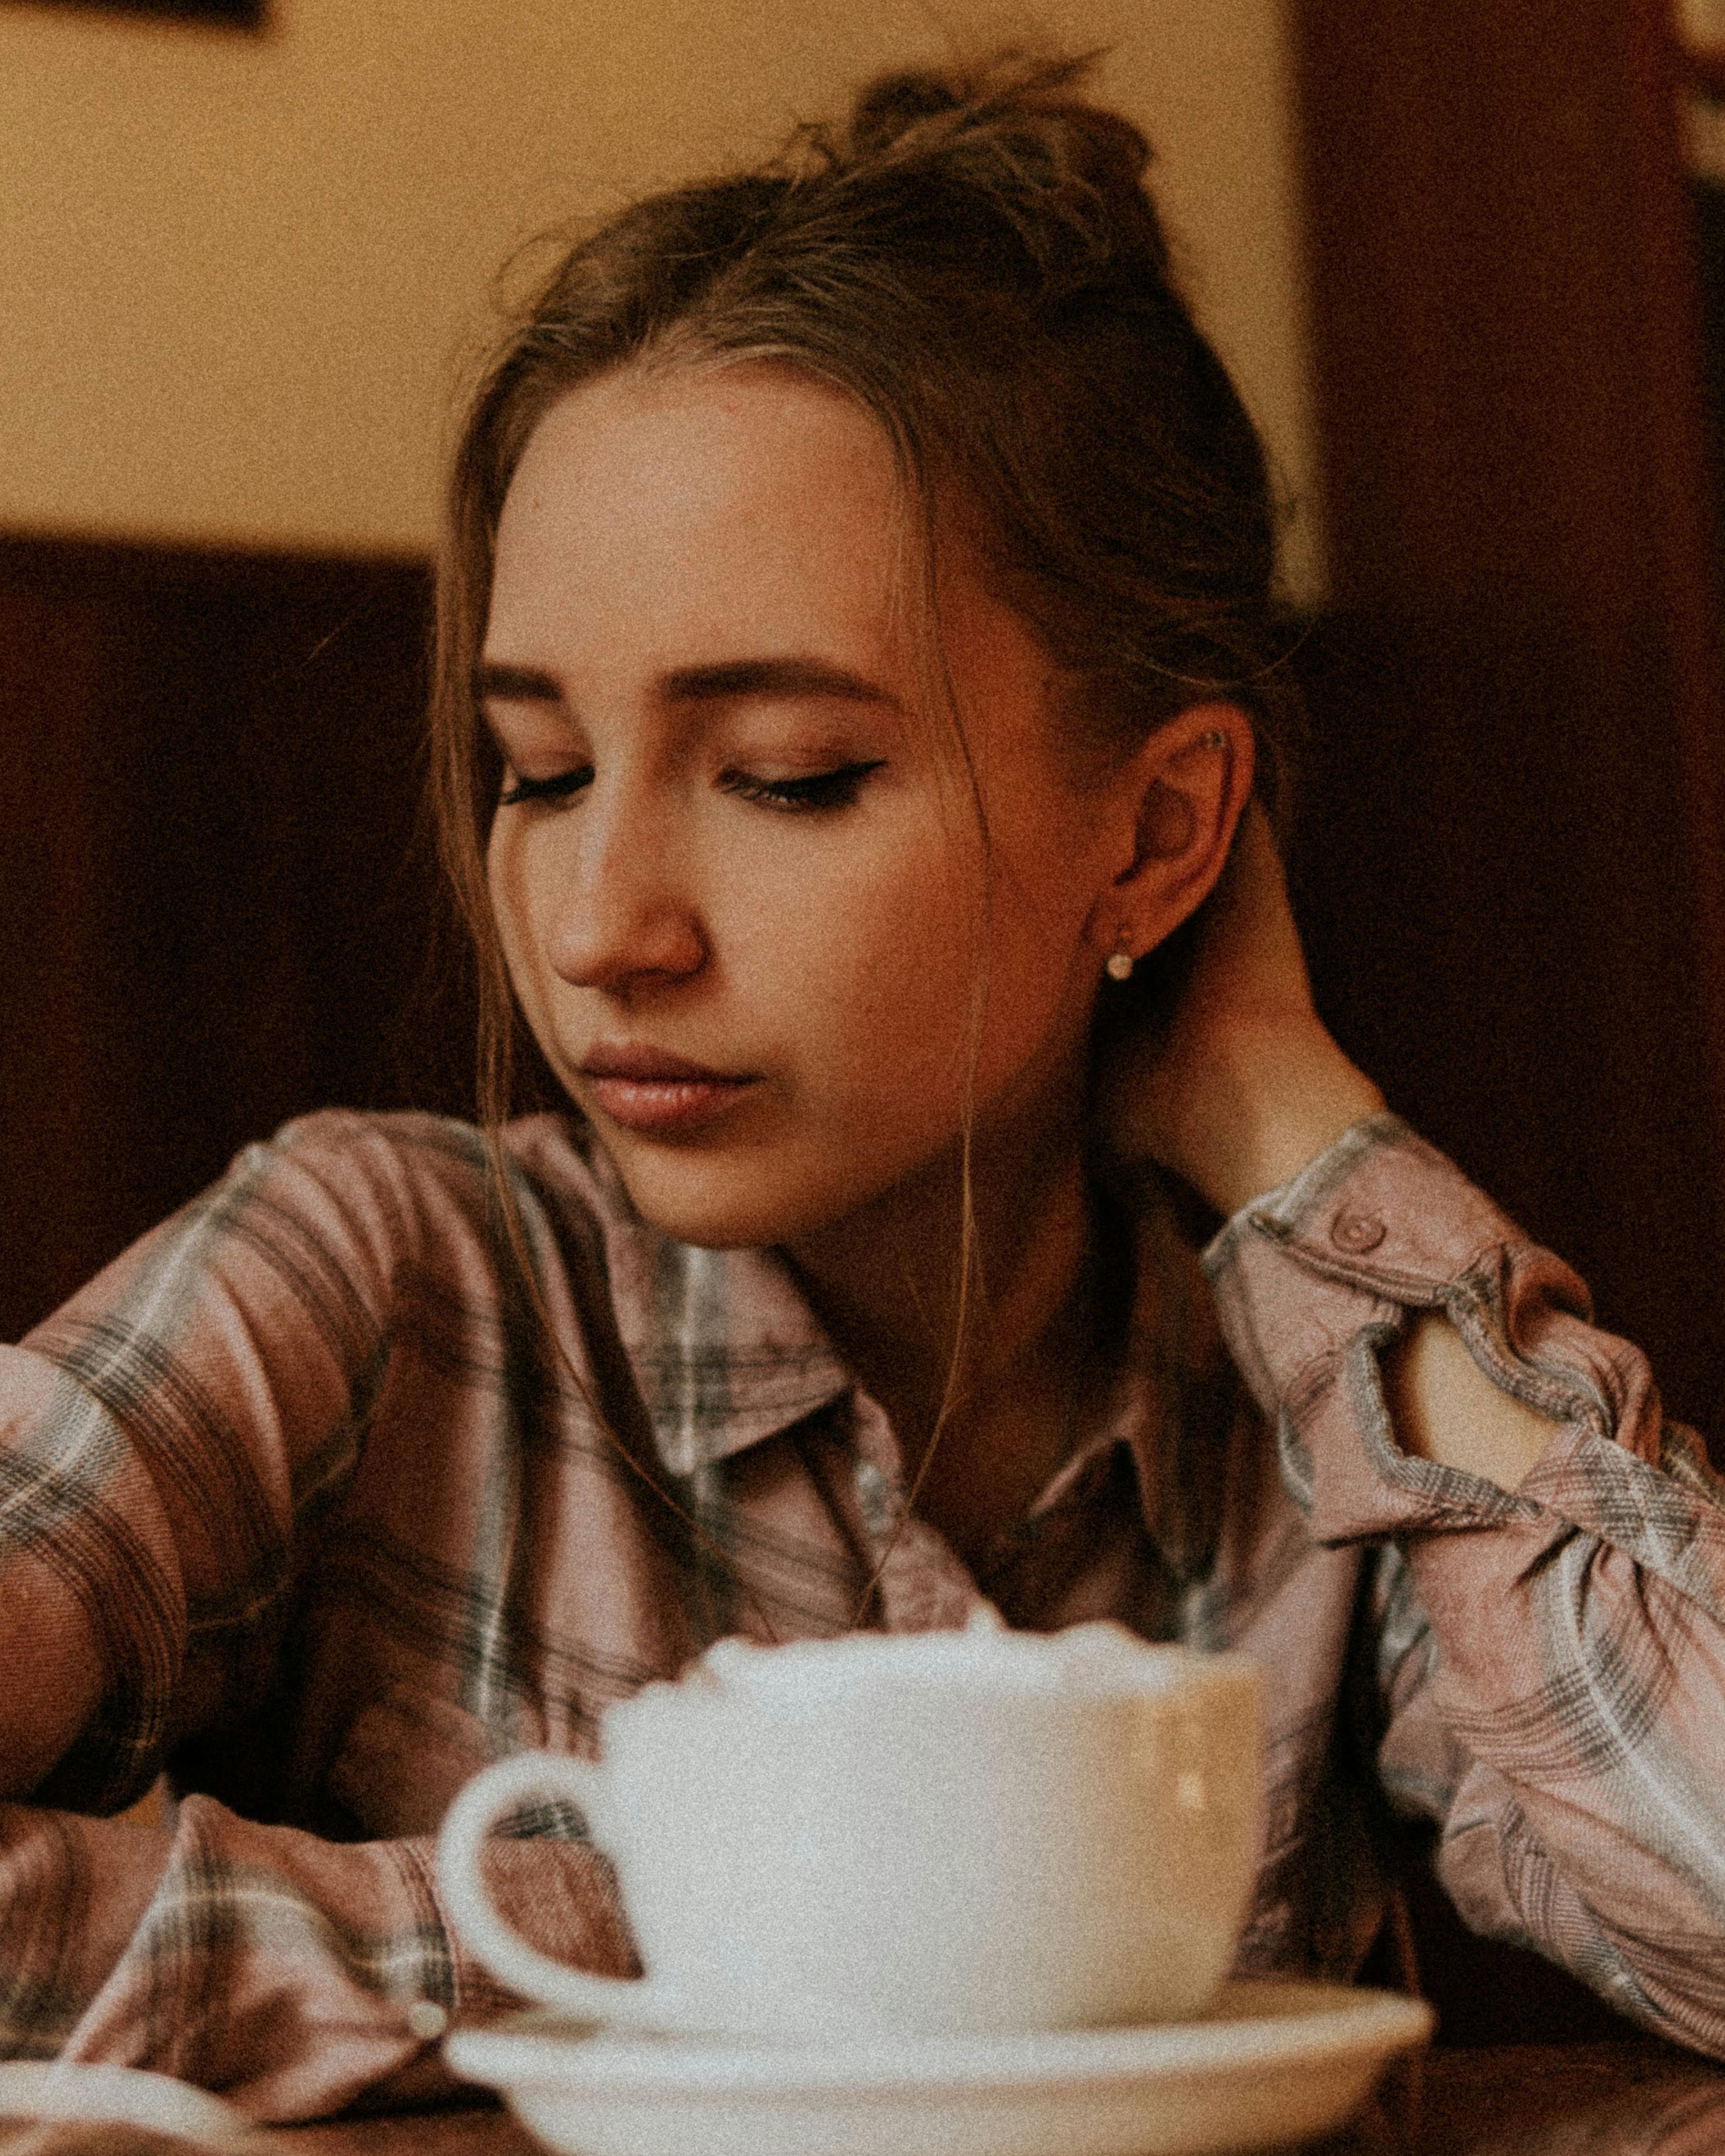 Free Photo  Girl drinking a cup of coffee